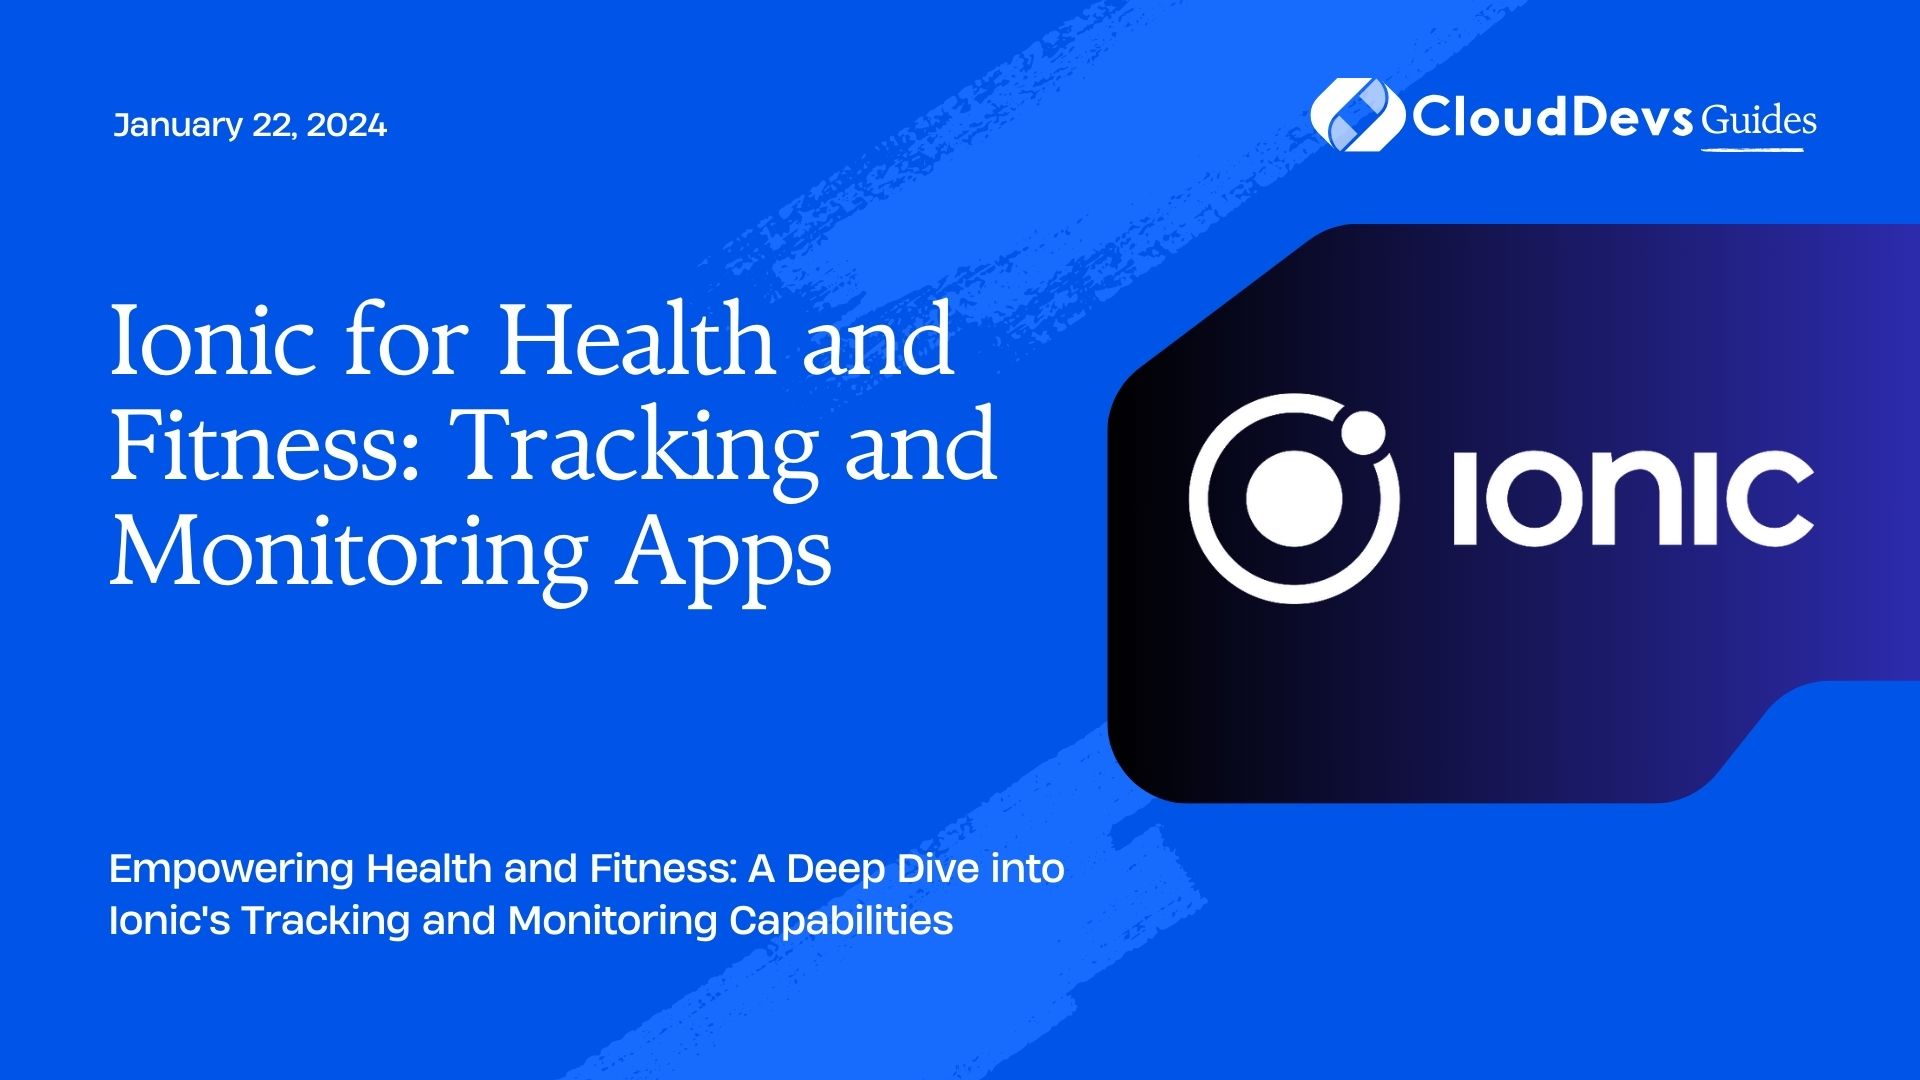 Ionic for Health and Fitness: Tracking and Monitoring Apps